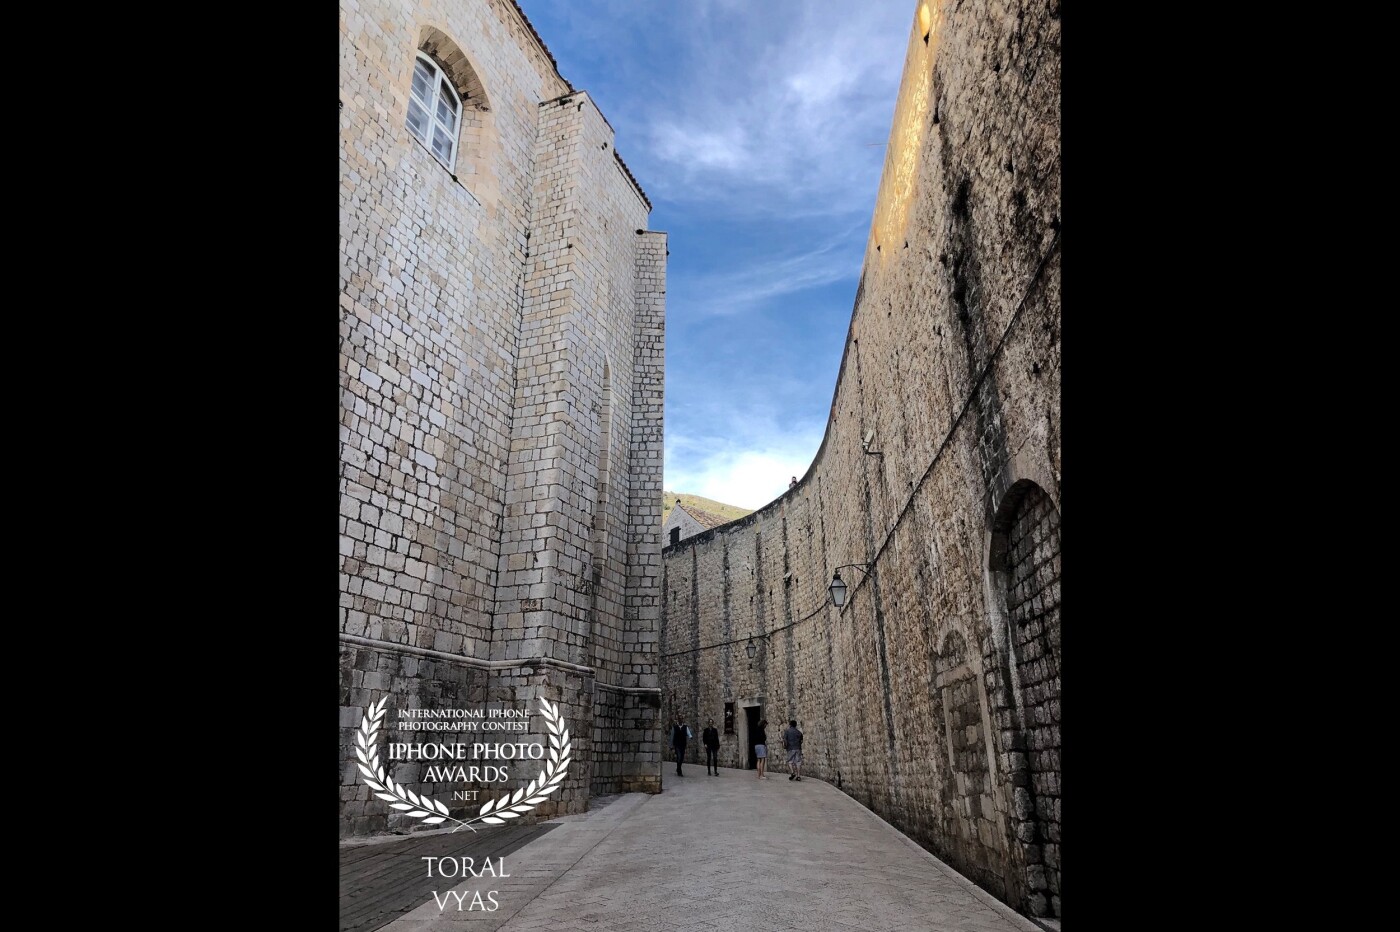 I can’t forget the city which got famous after  Game of Thrones, Dubrovnik, Croatia. It has one of the oldest cities and streets. It’s been a great feeling to roam around between those old walls.. one of my great click shot by iPhone...